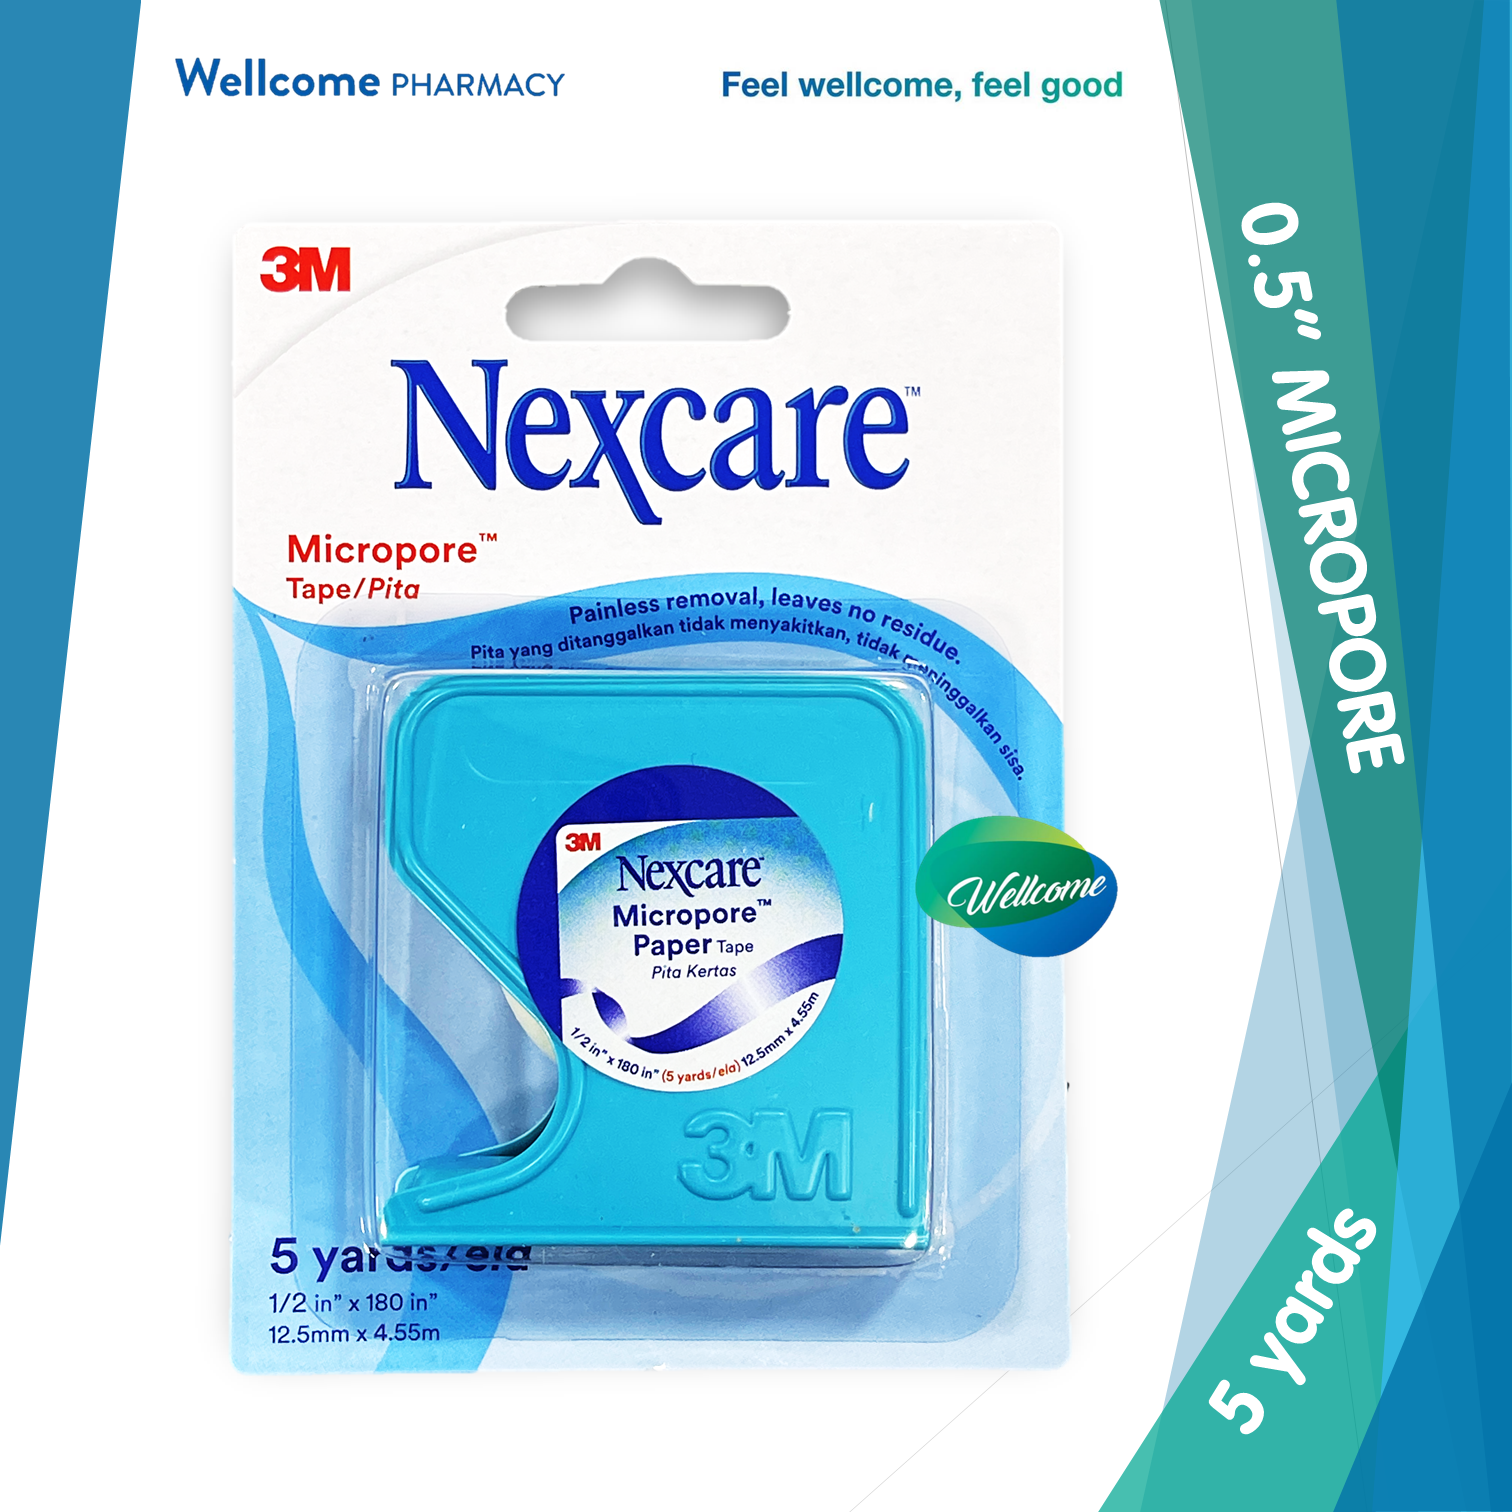 Nexcare Micropore Tape 0.5in x 5yd.png